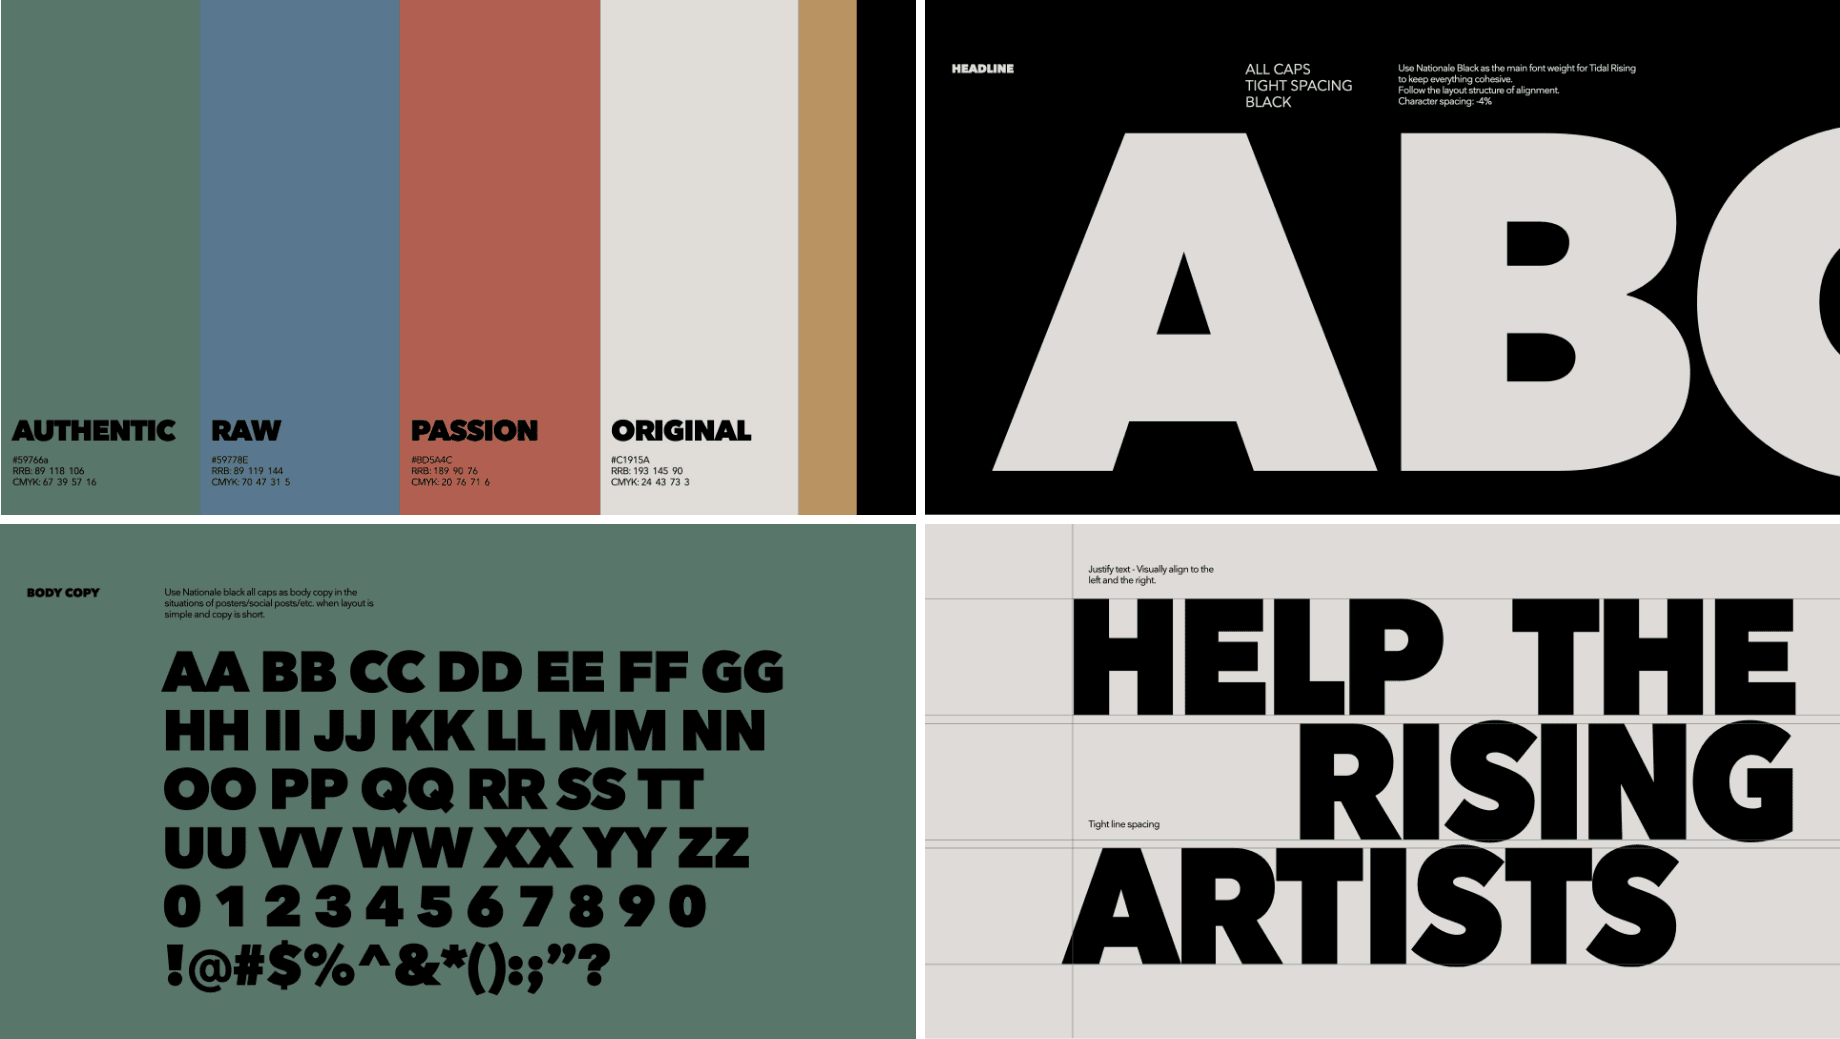 Title Rising style guide close up. Colors listed as Authentic, Raw, Passion, Original. Headline All Caps Tight Spacing Black, Body Copy. Justify -text- Visually align to the left and the right